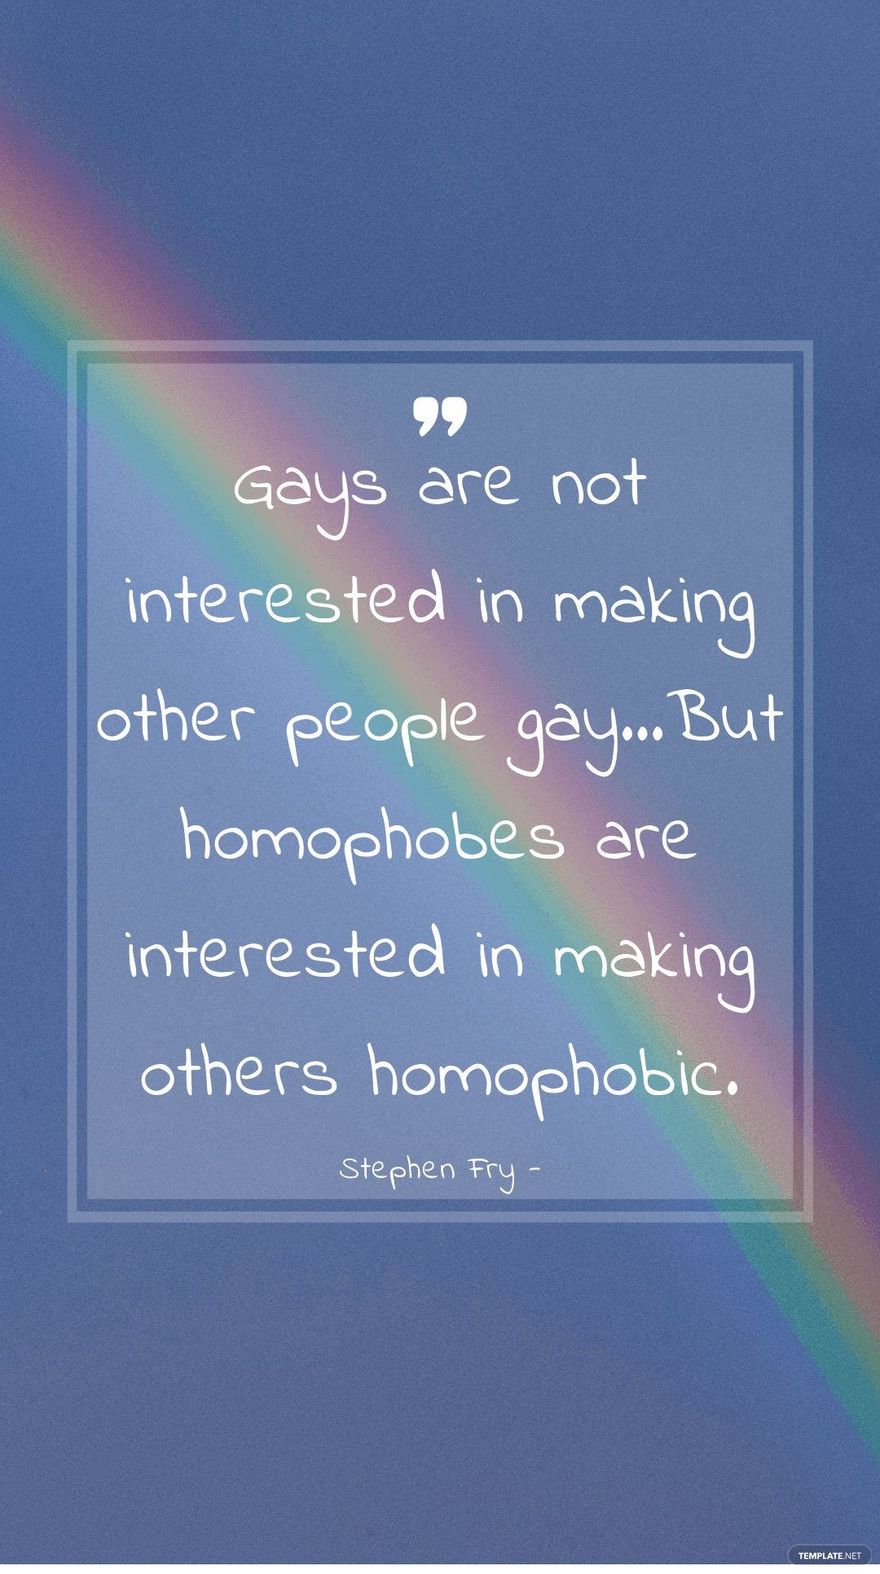 Stephen Fry - Gays are not interested in making other people gay…But homophobes are interested in making others homophobic.